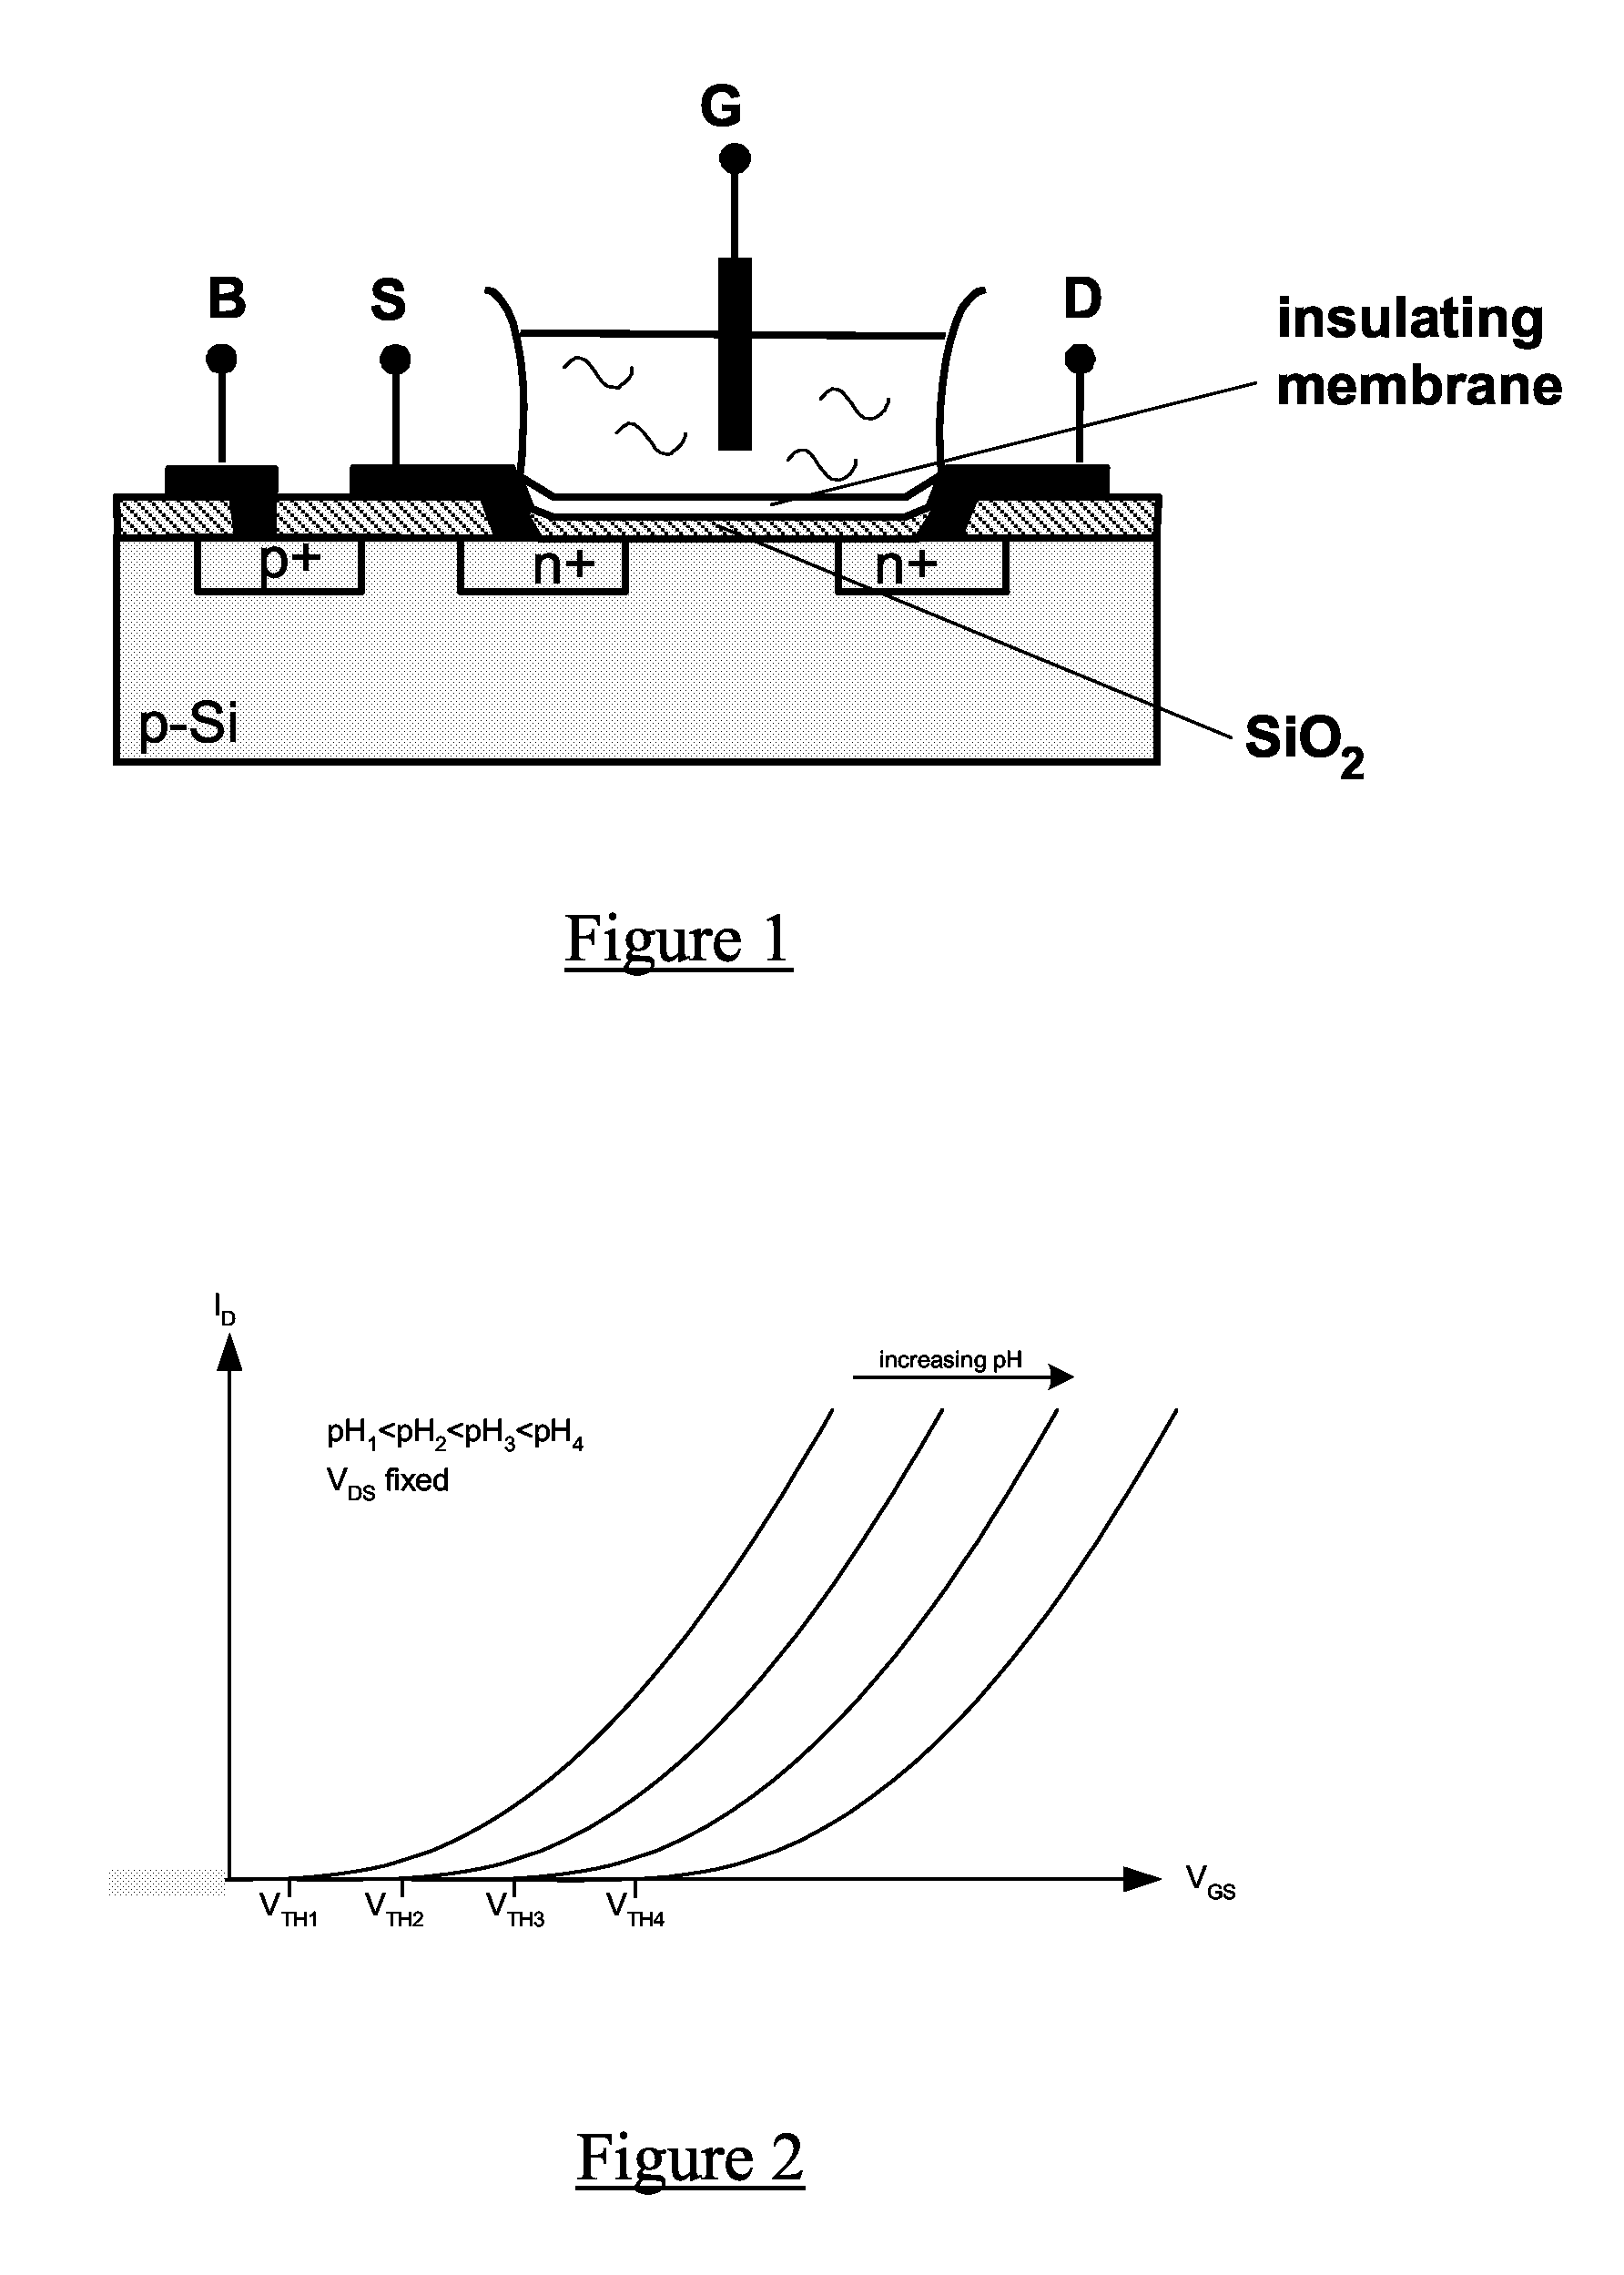 Signal processing circuit comprising ion sensitive field effect transistor and method of monitoring a property of a fluid